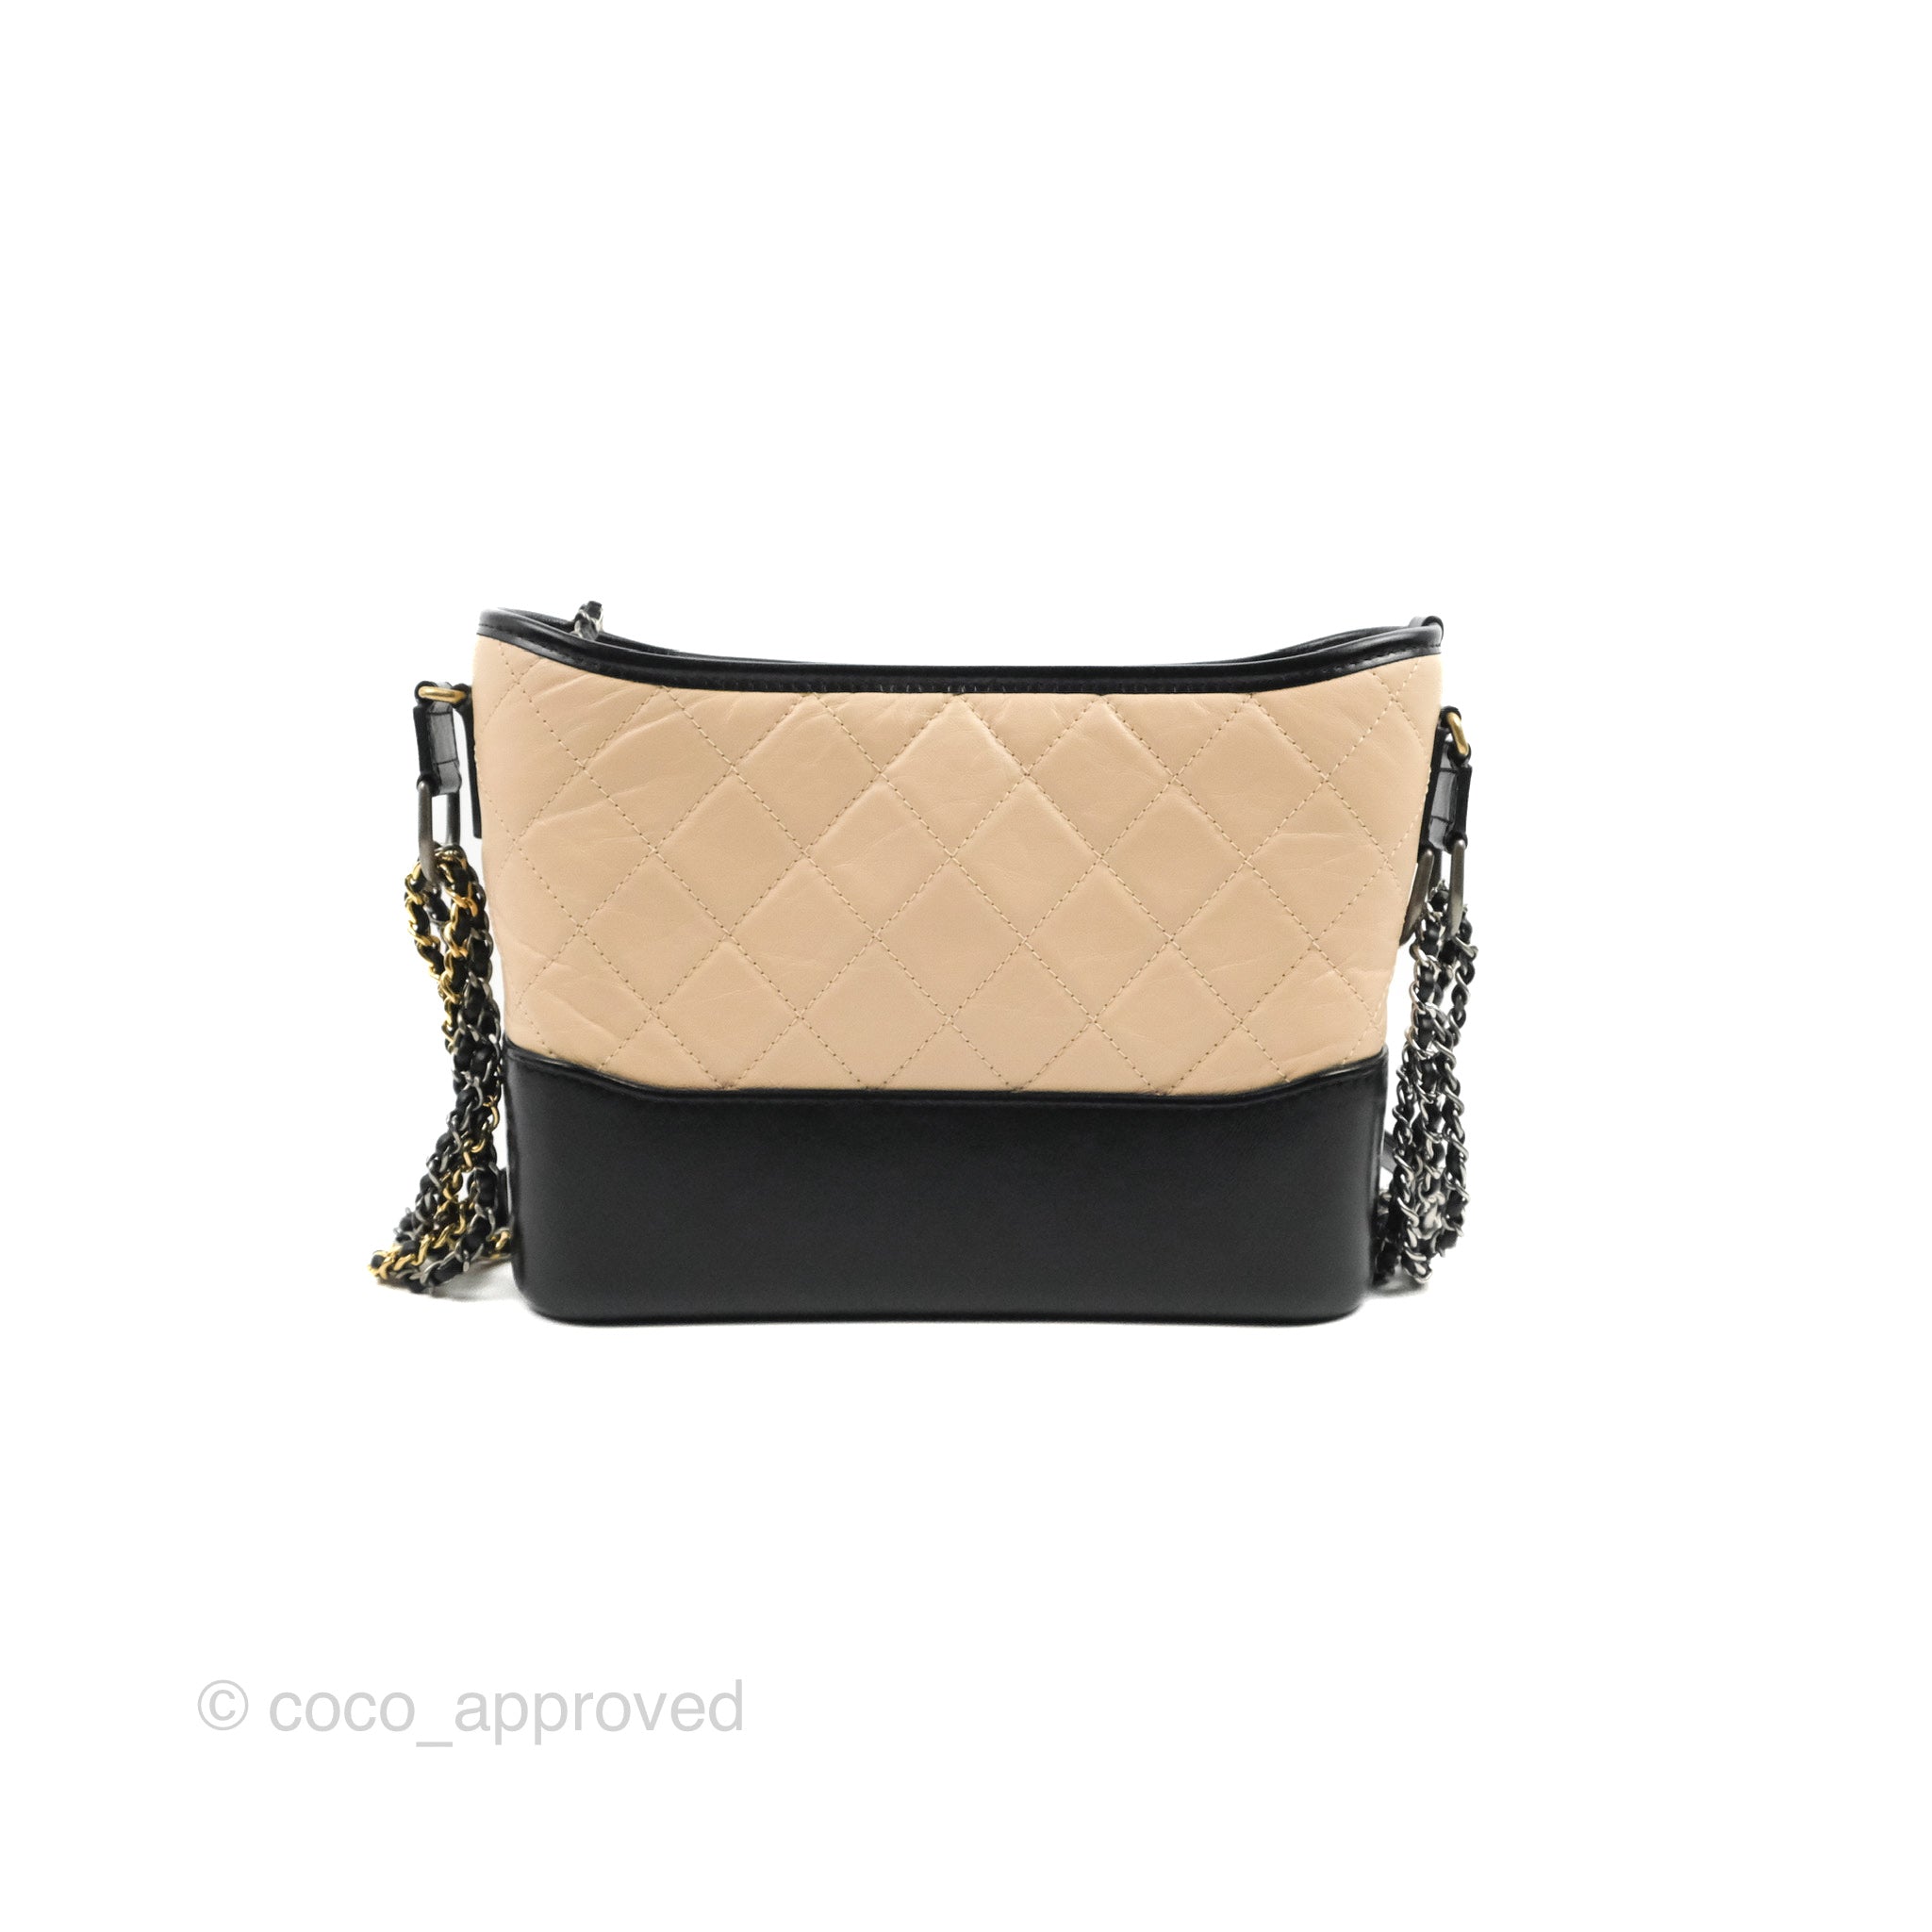 CHANEL Aged Calfskin Quilted Leather Medium Gabrielle Messenger